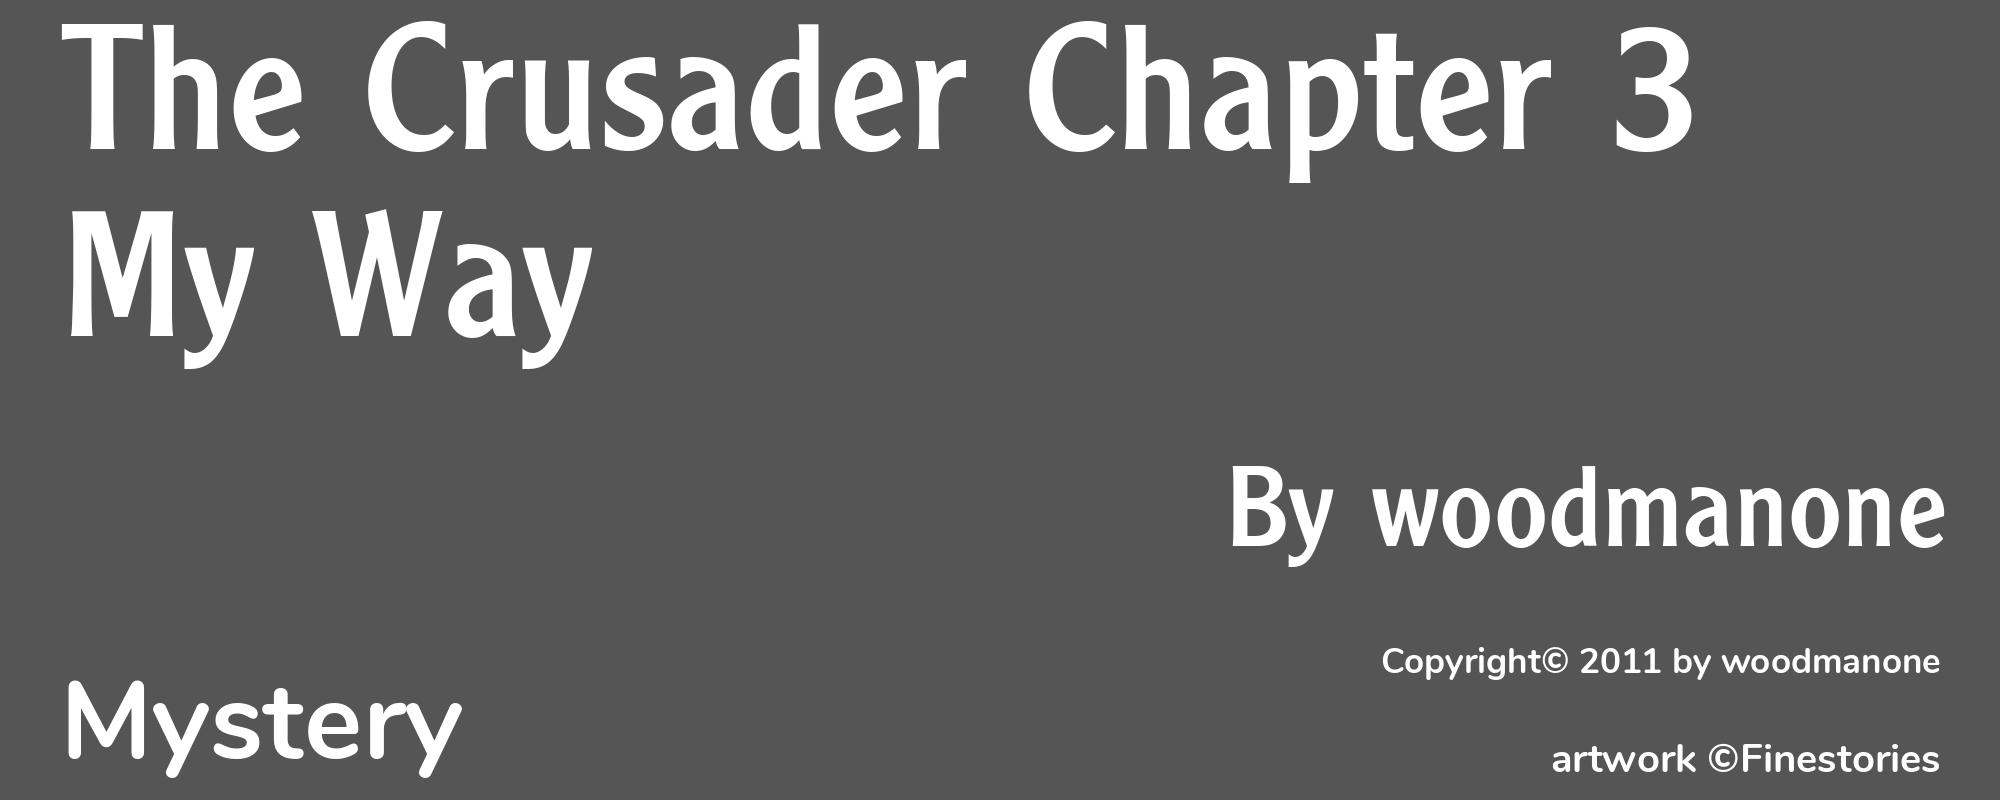 The Crusader Chapter 3 My Way - Cover